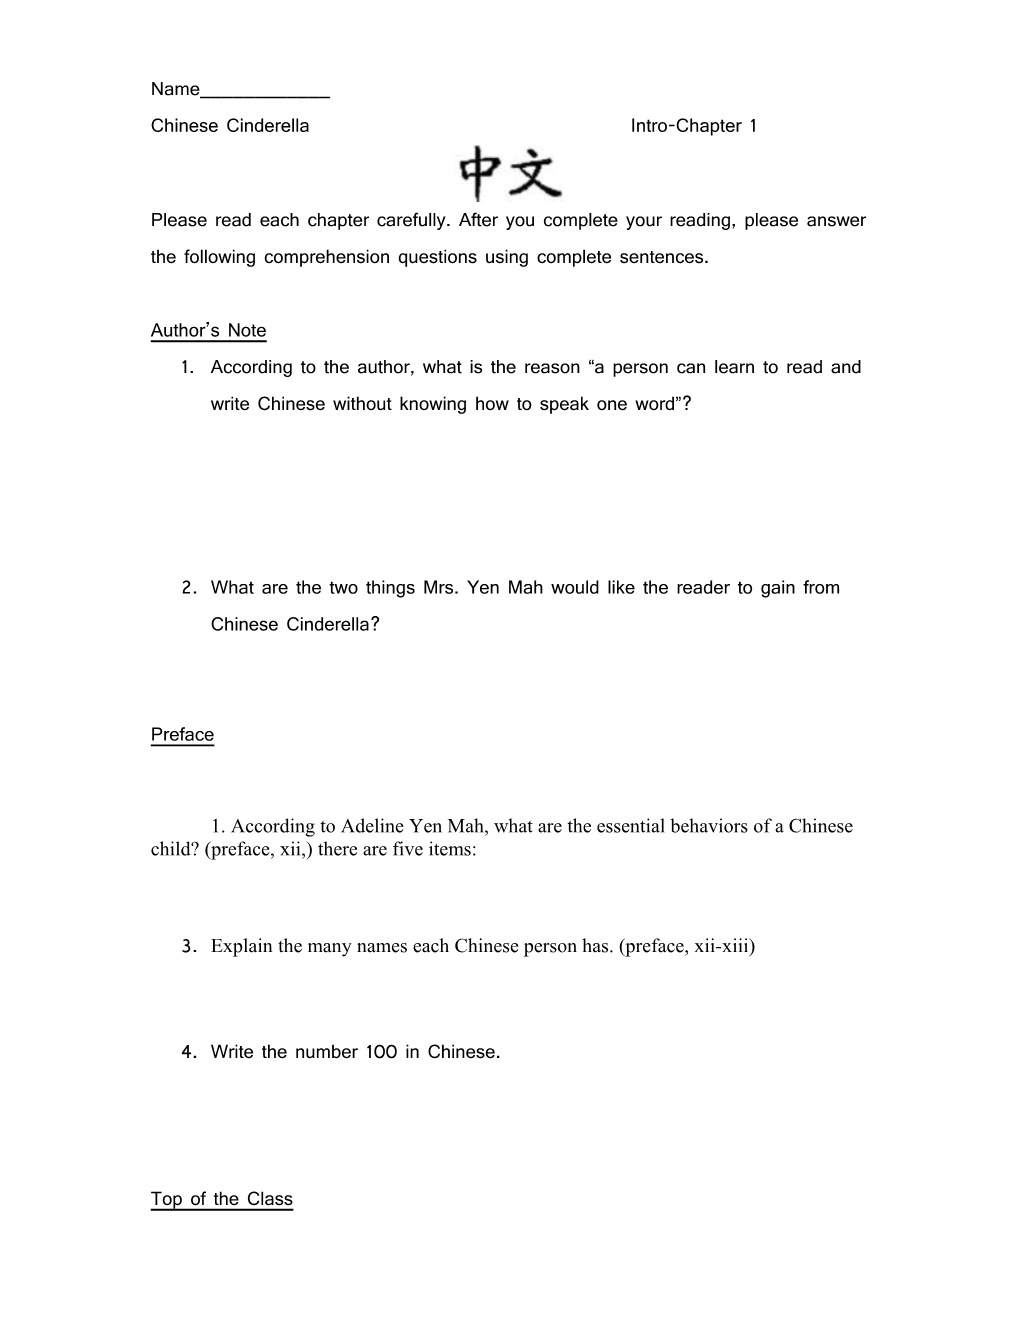 Chinese Cinderellaintro-Chapter 1